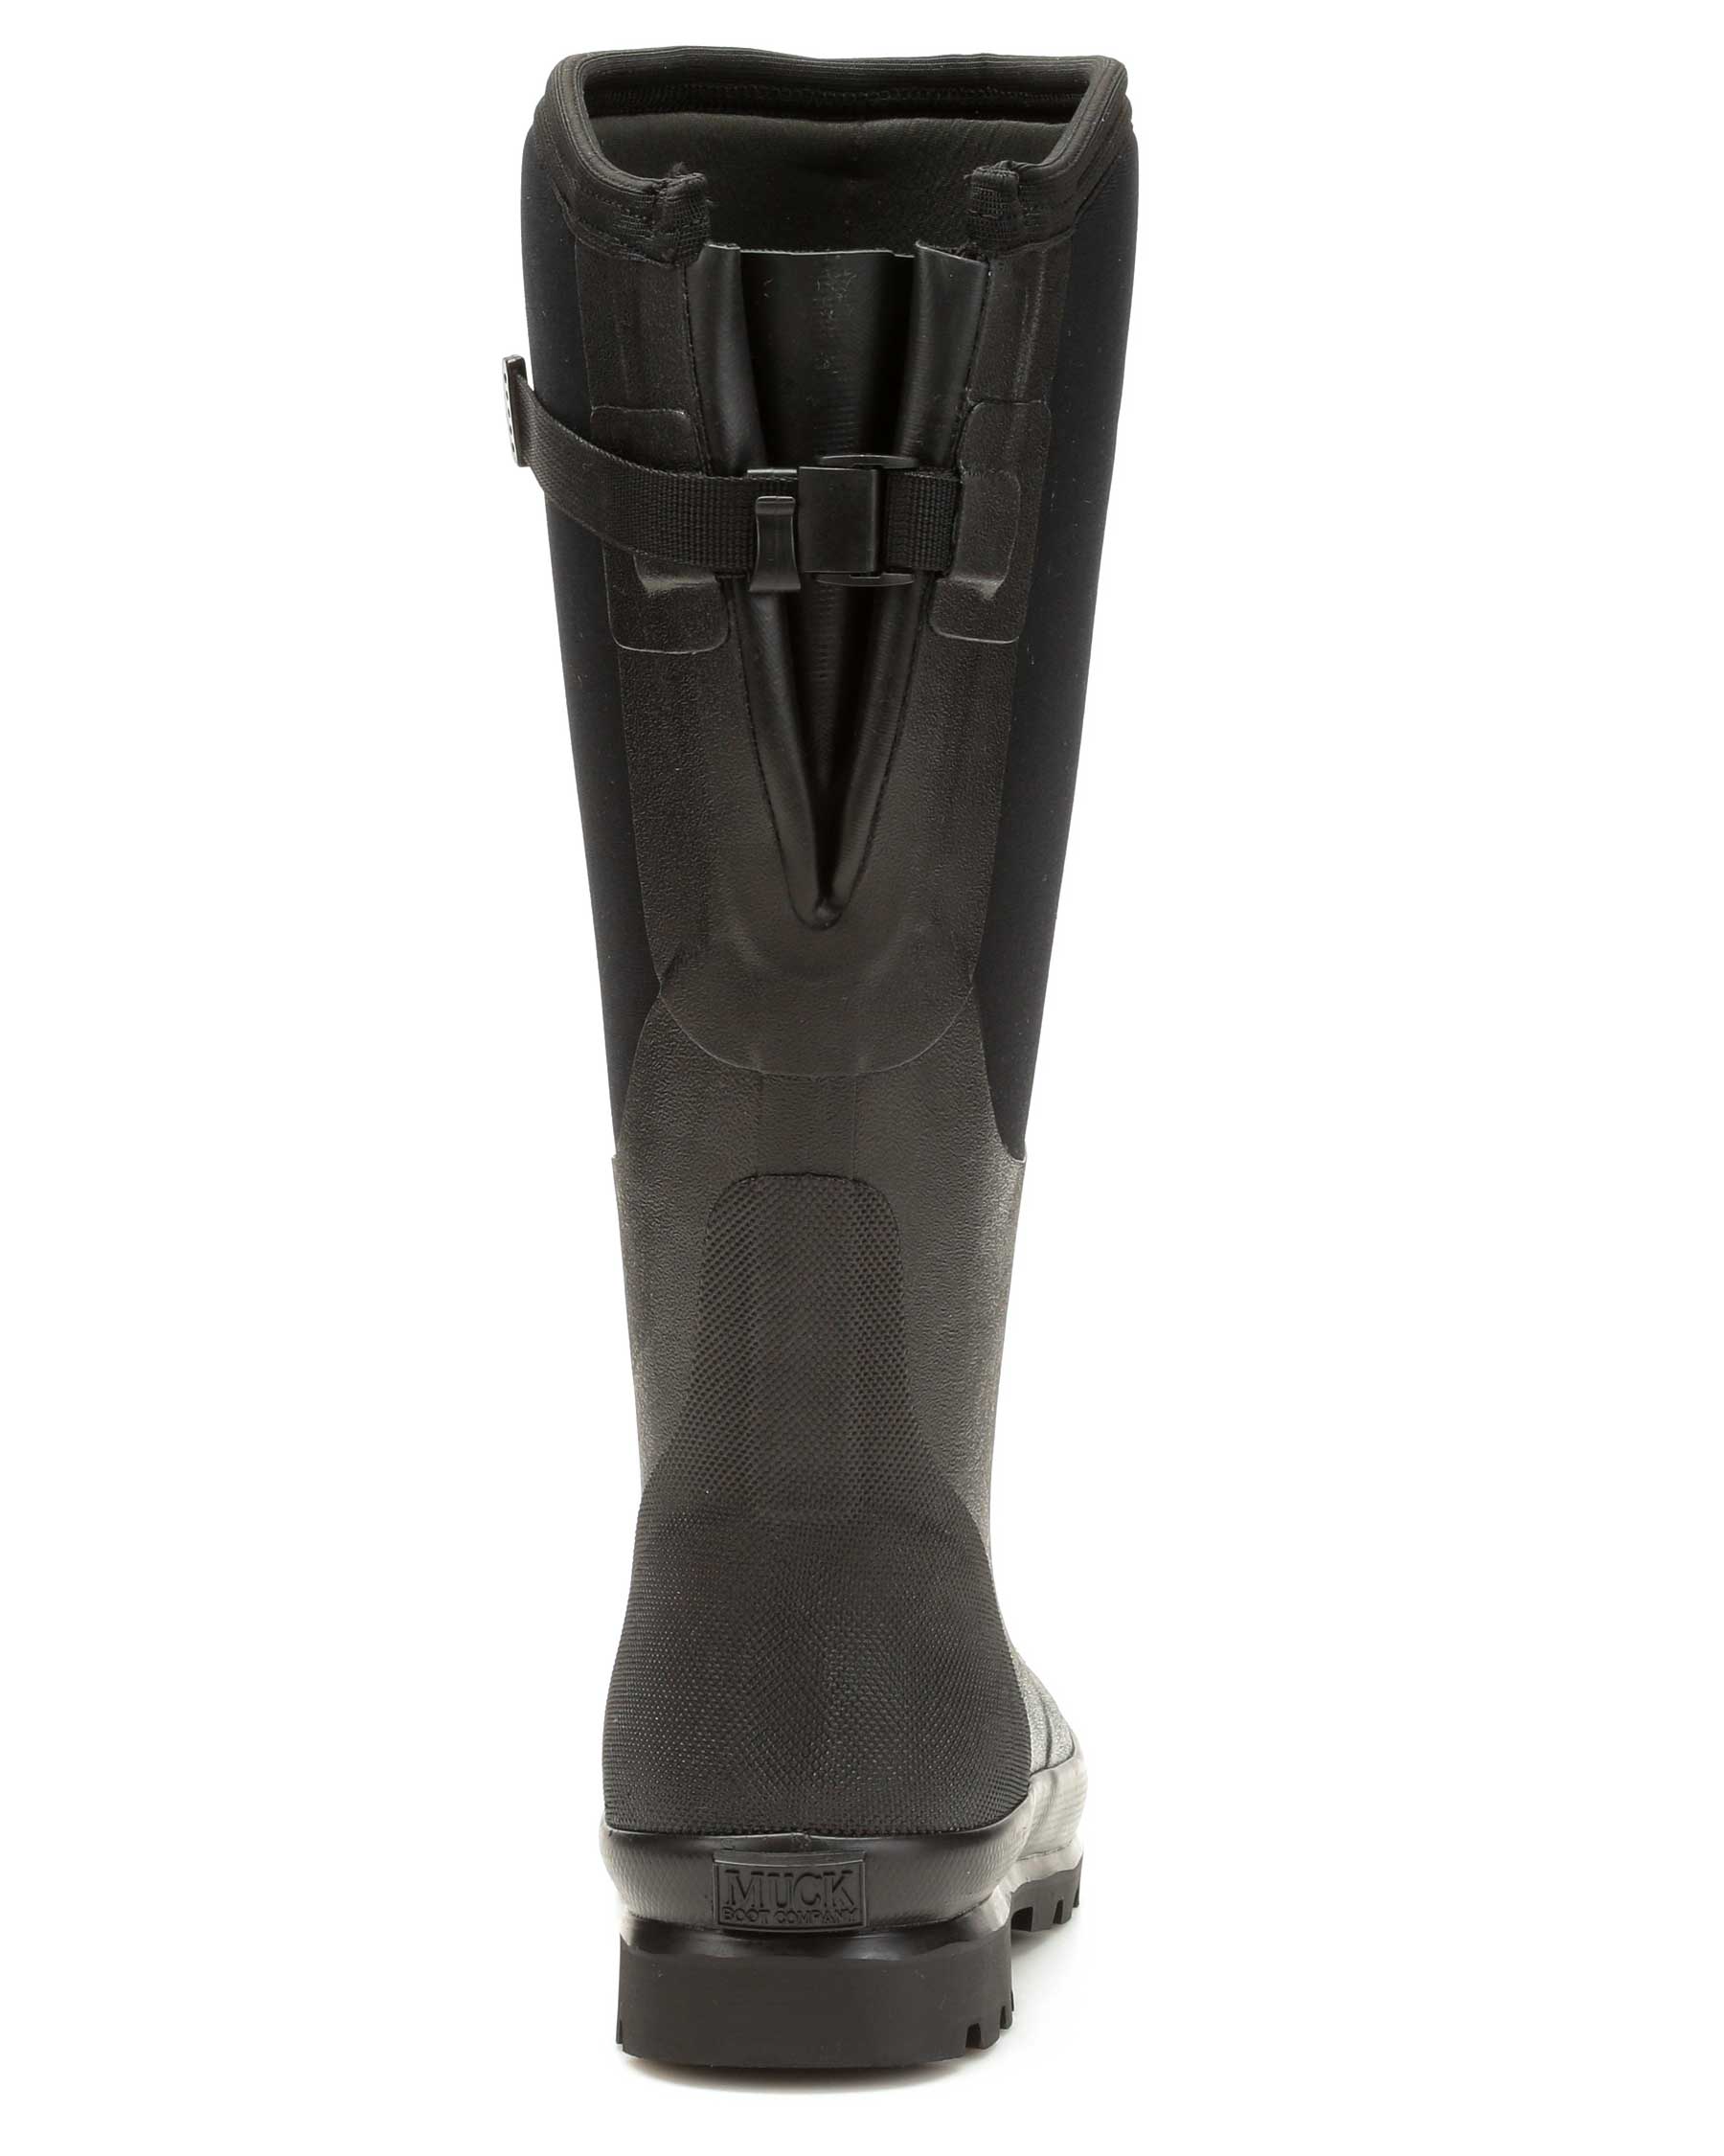 Womens Chore XF Tall Gumboots